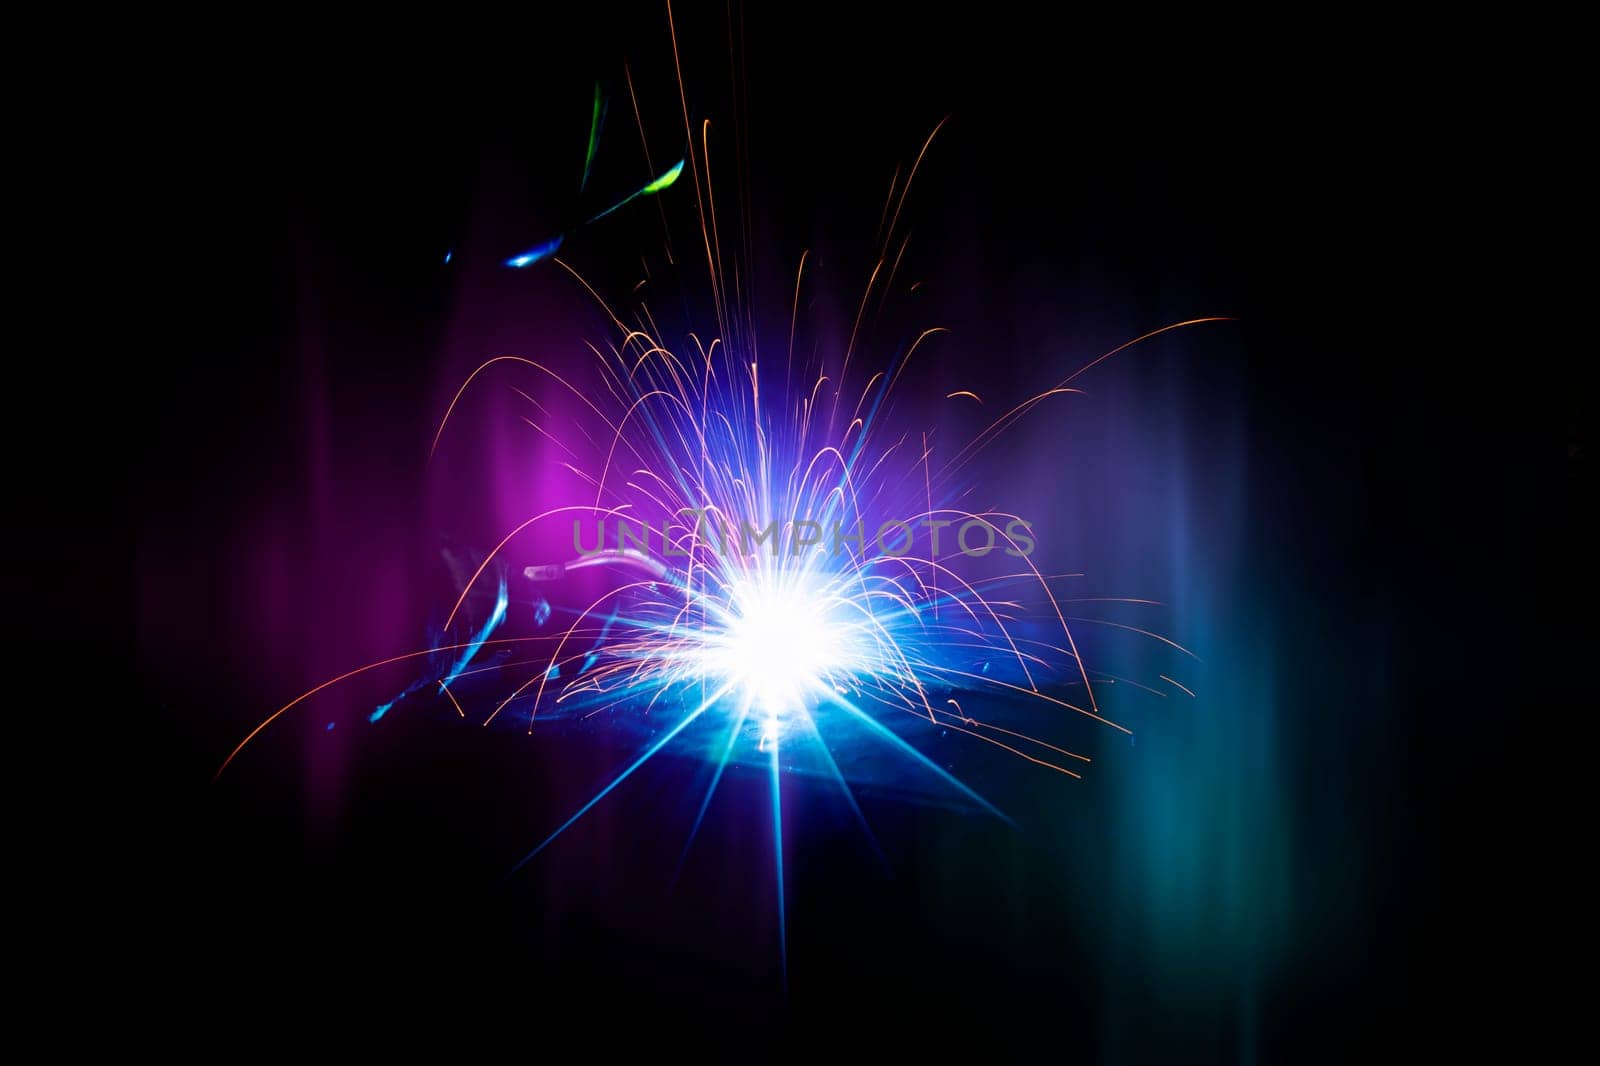 Flying bright sparks from welding on a dark background.